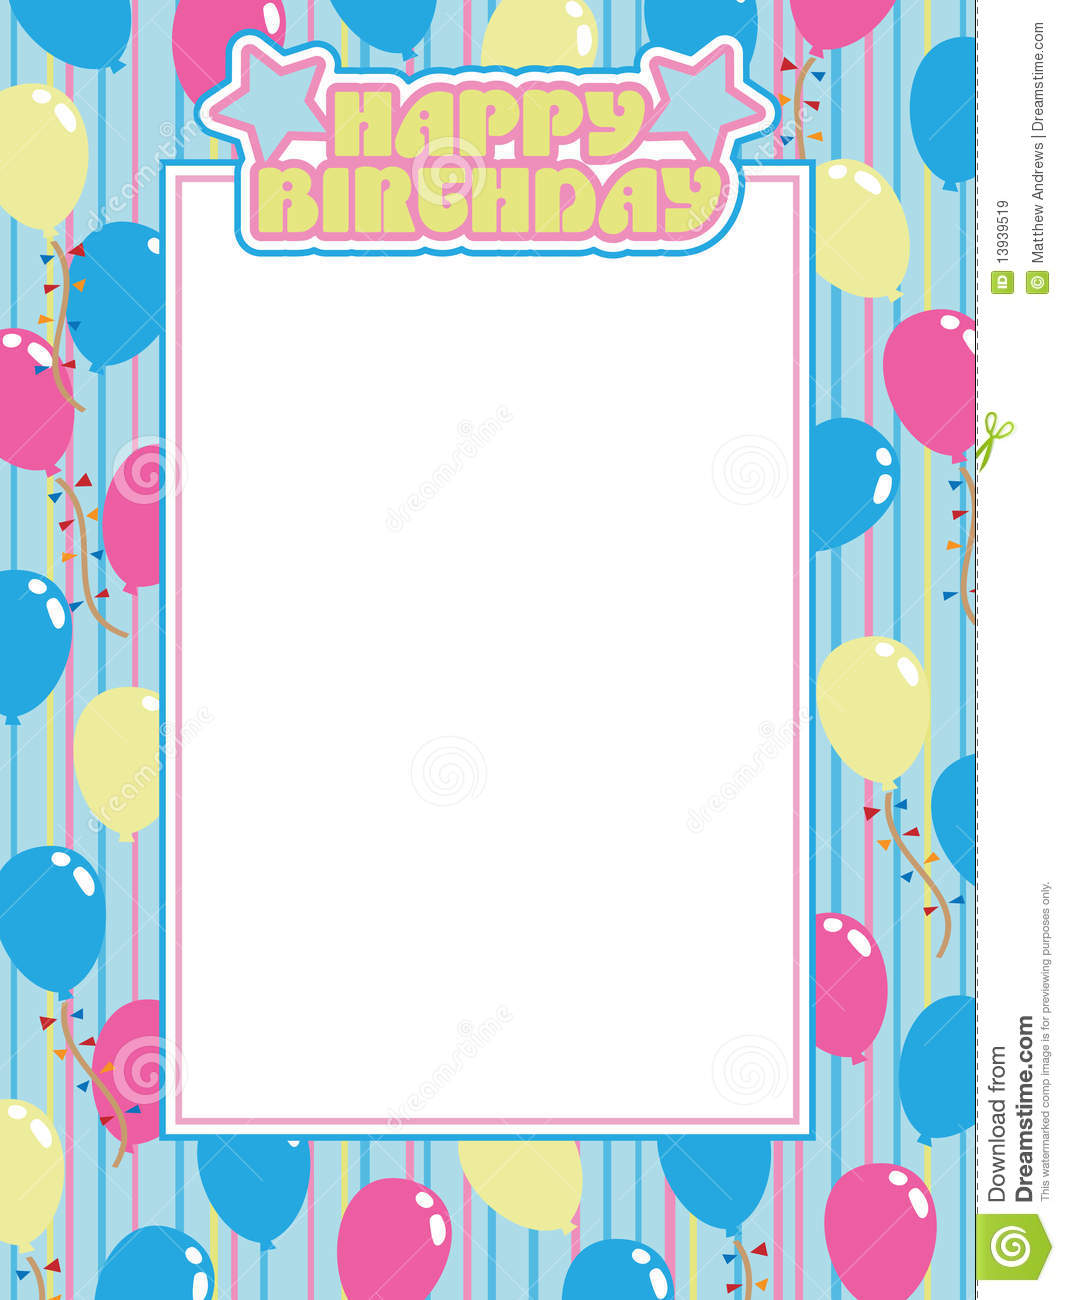 Birthday Frame Royalty Free Stock Images   Image  13939519